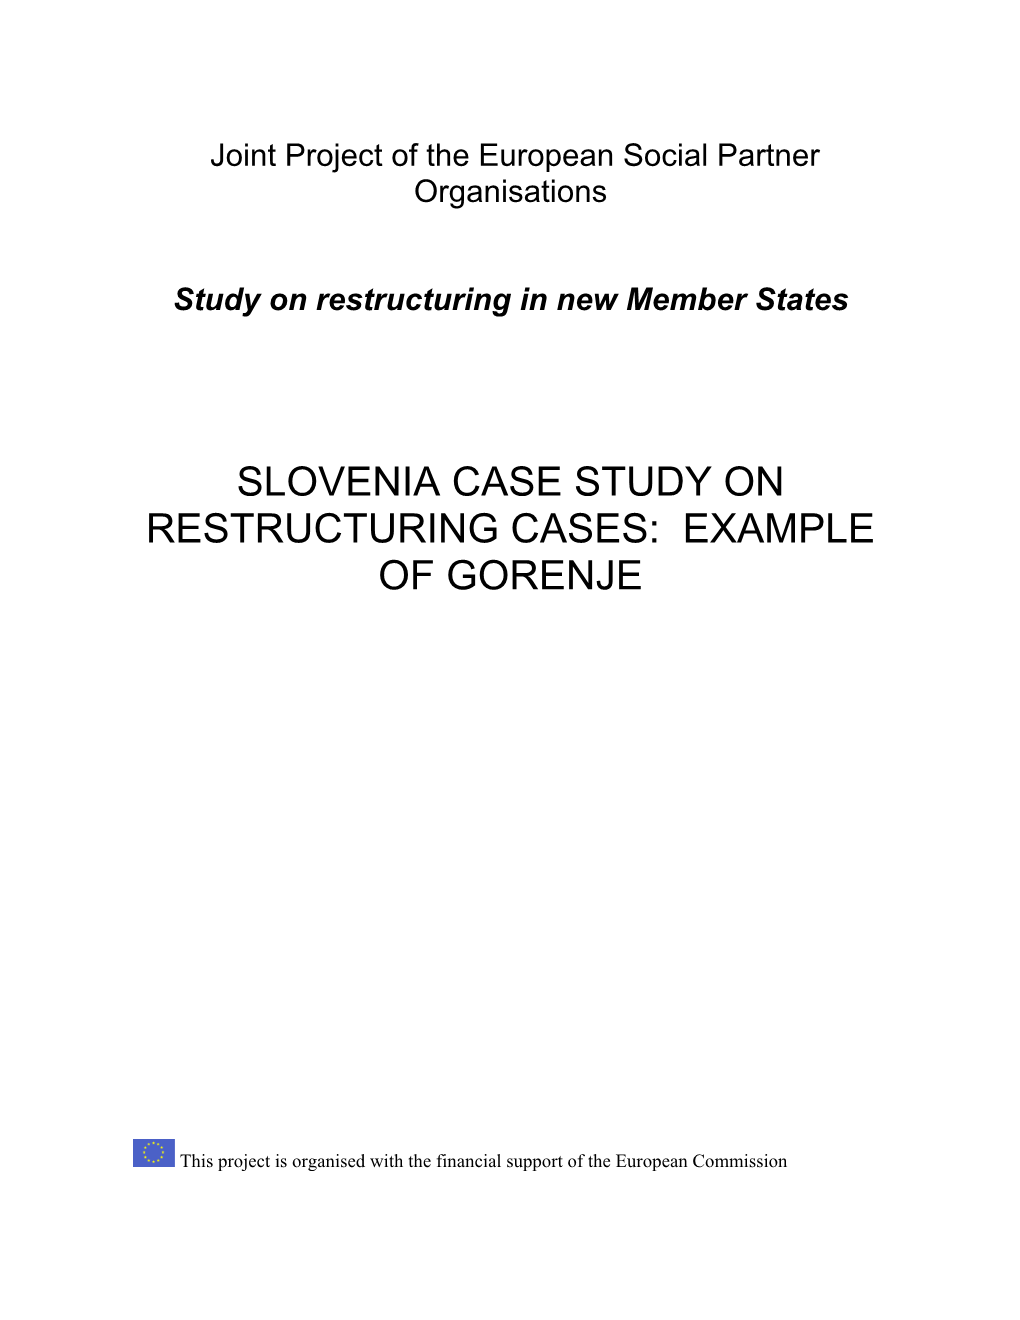 Slovenia Case Study on Restructuring Cases: Example of Gorenje